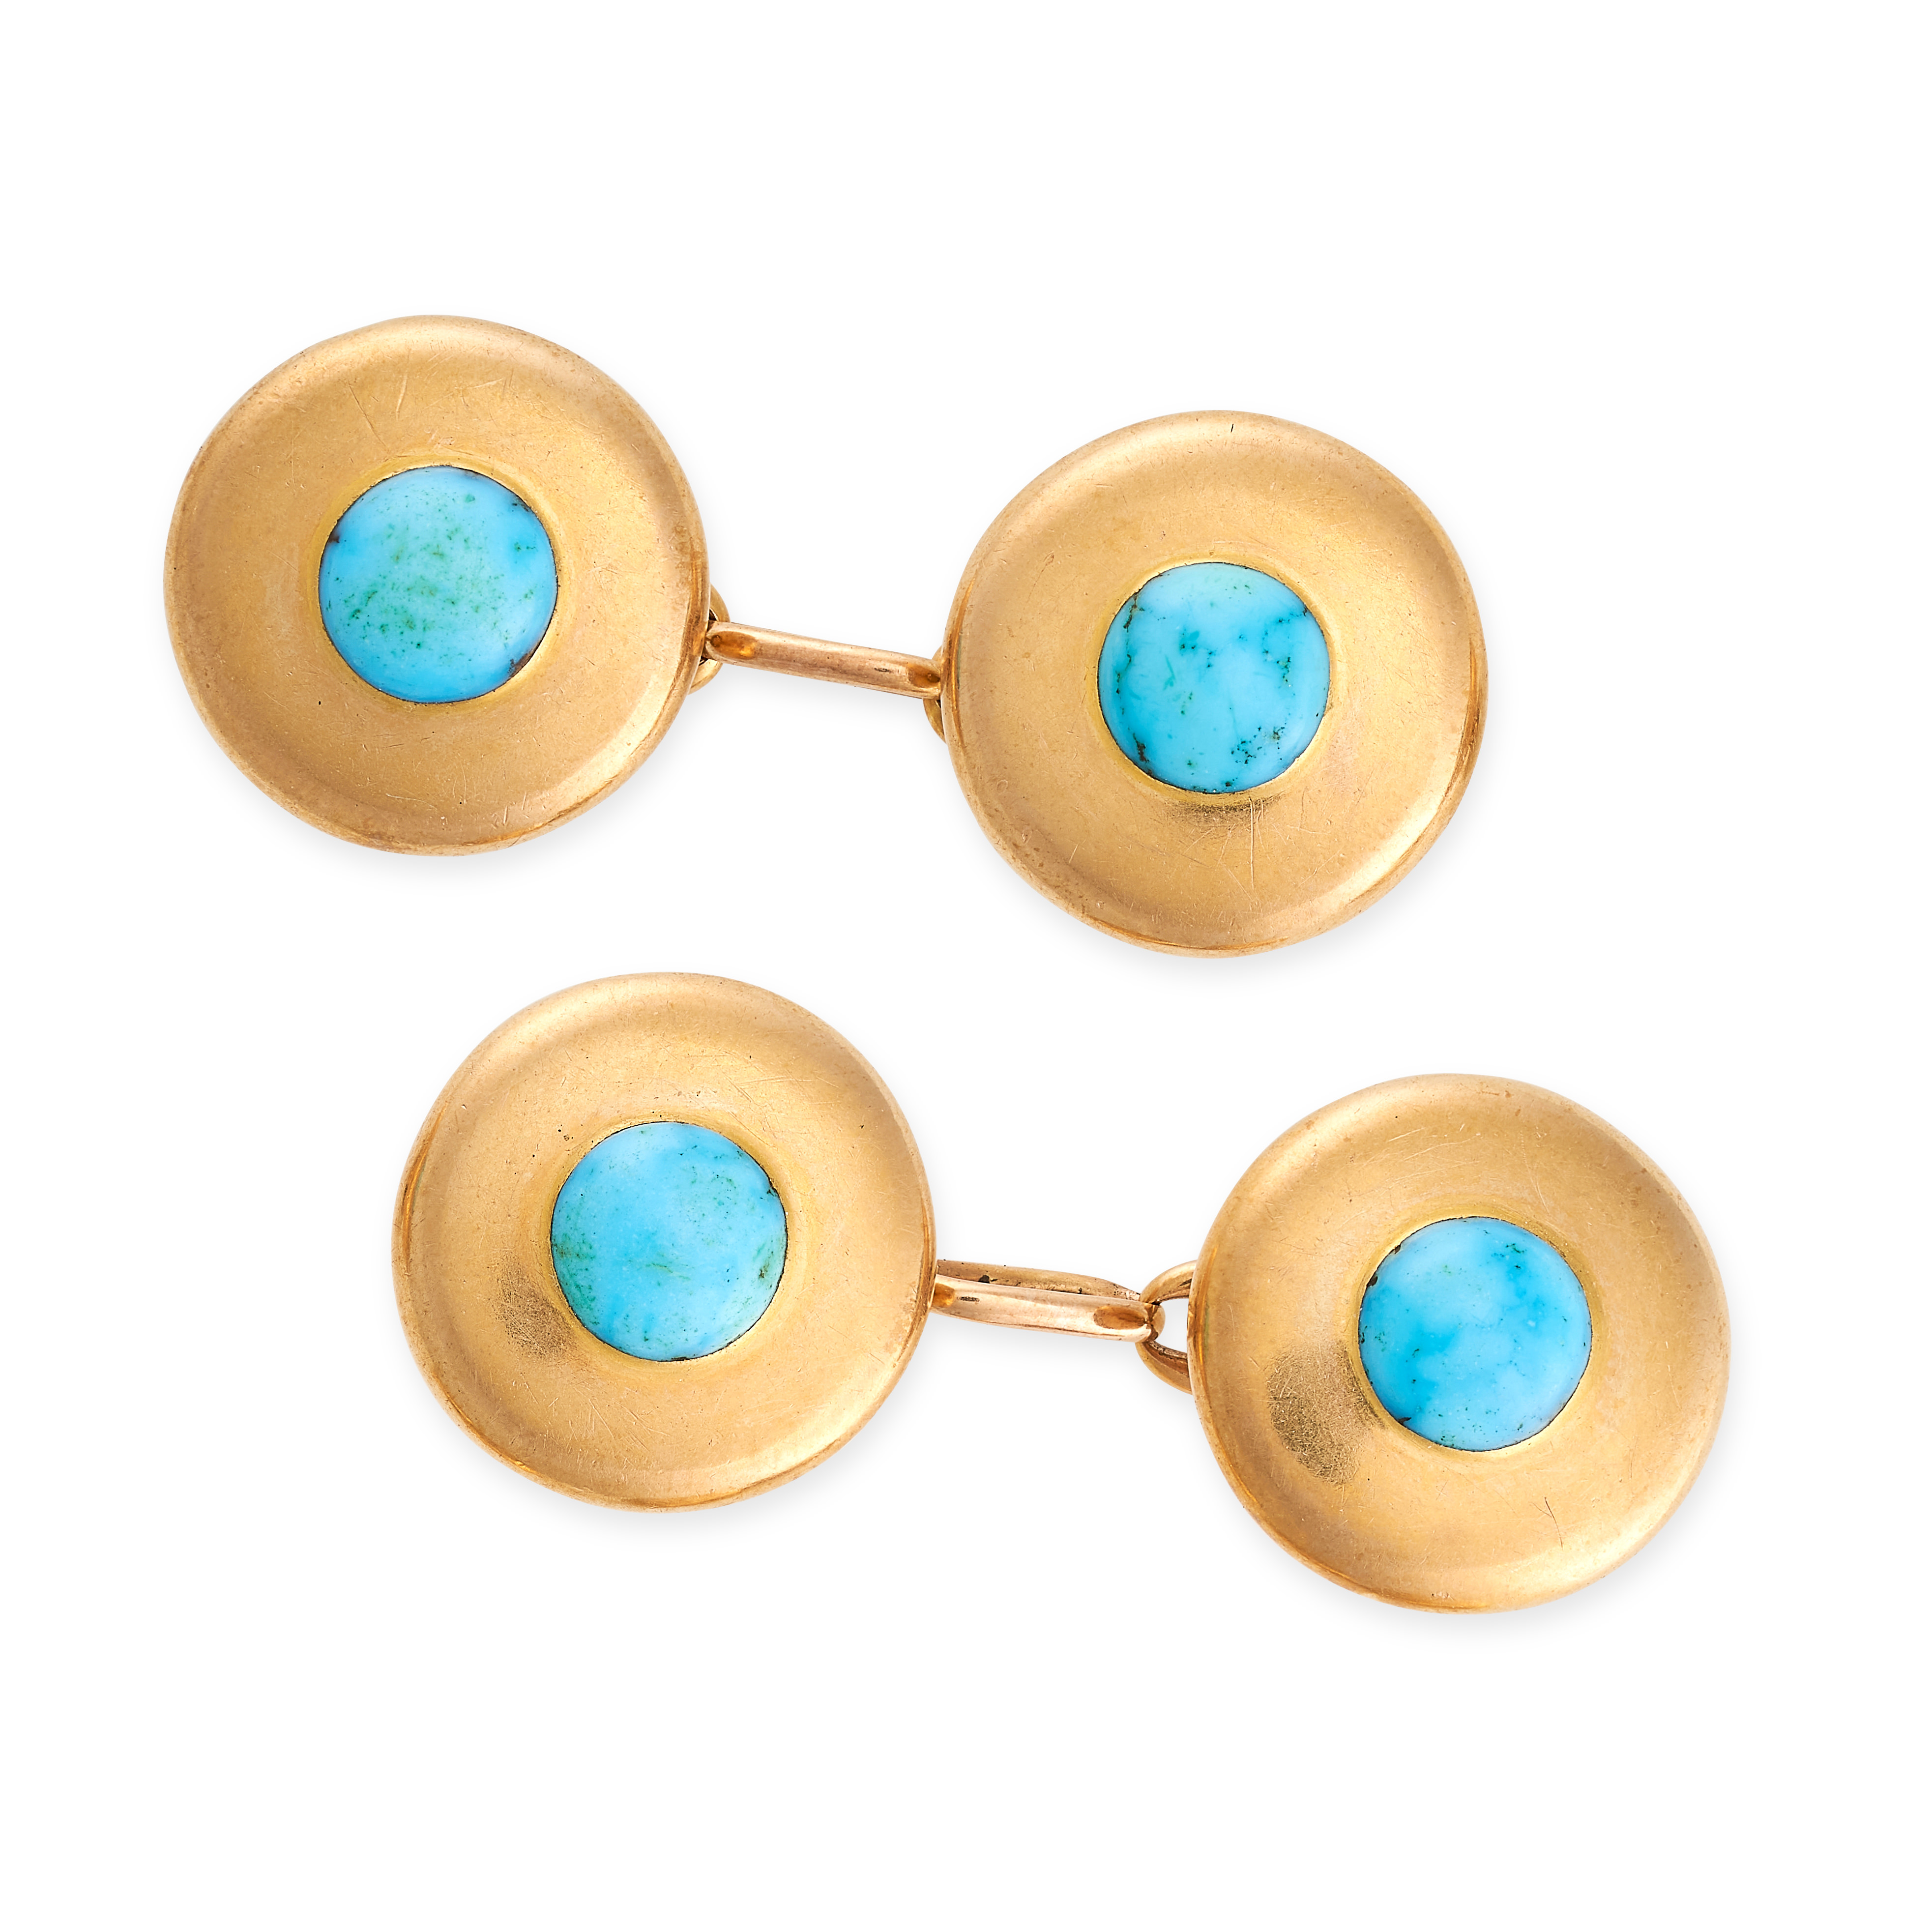 A PAIR OF ANTIQUE TURQUOISE CUFFLINKS in yellow gold, comprising four circular links each set with a